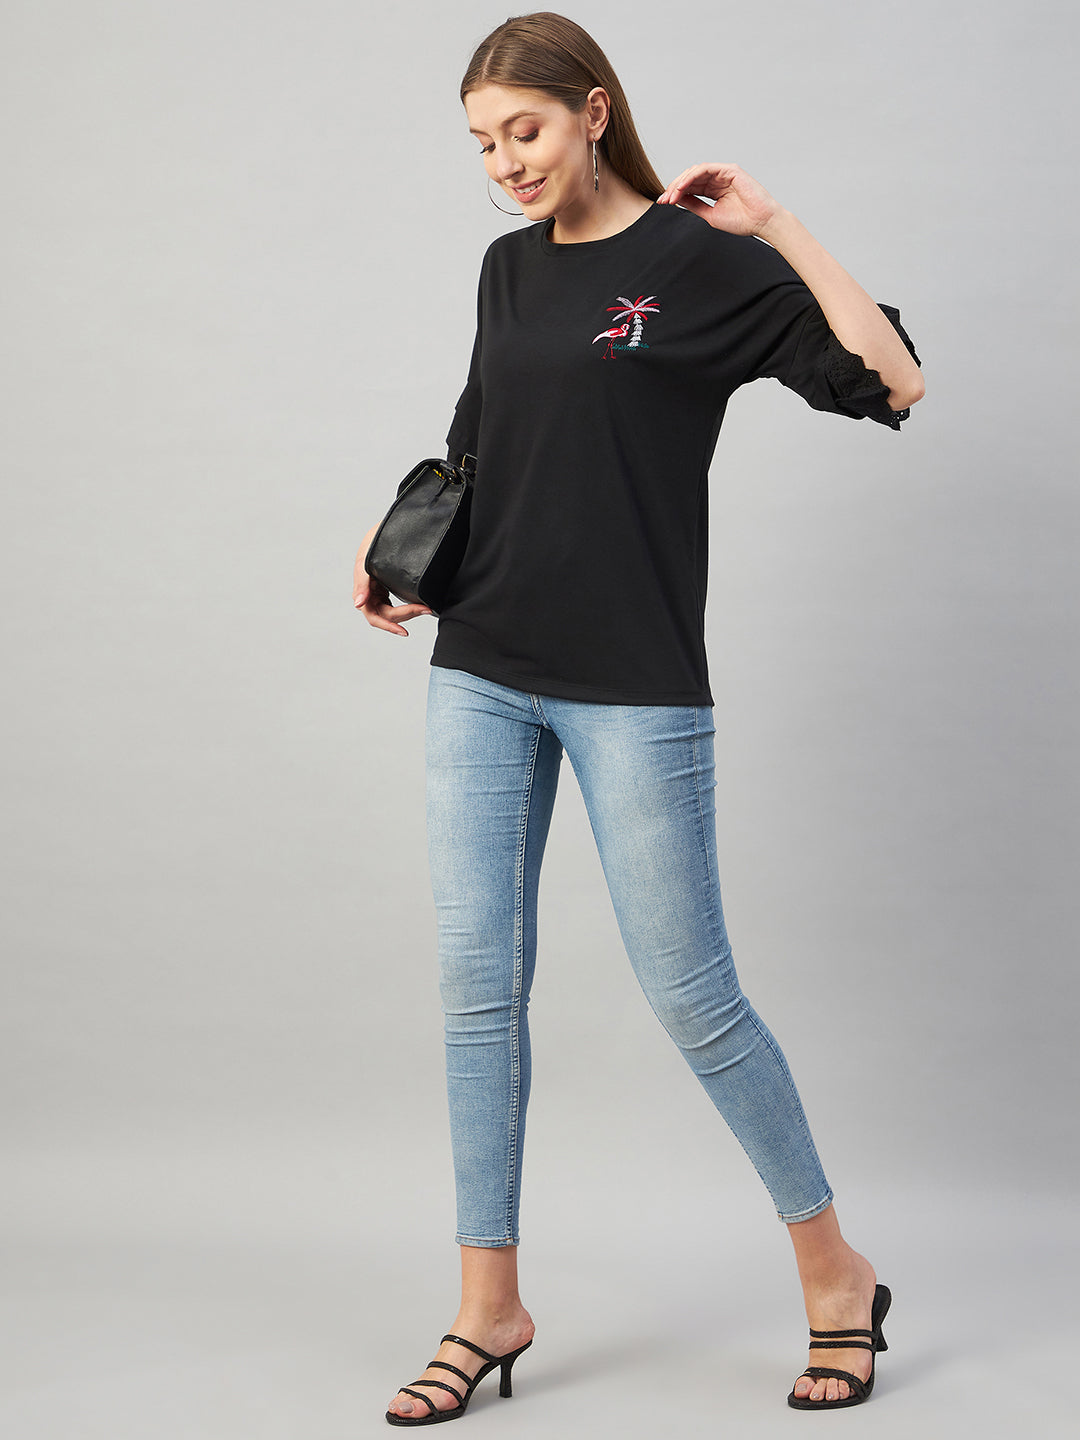 Austin Wood Women Embroidery Casual Top